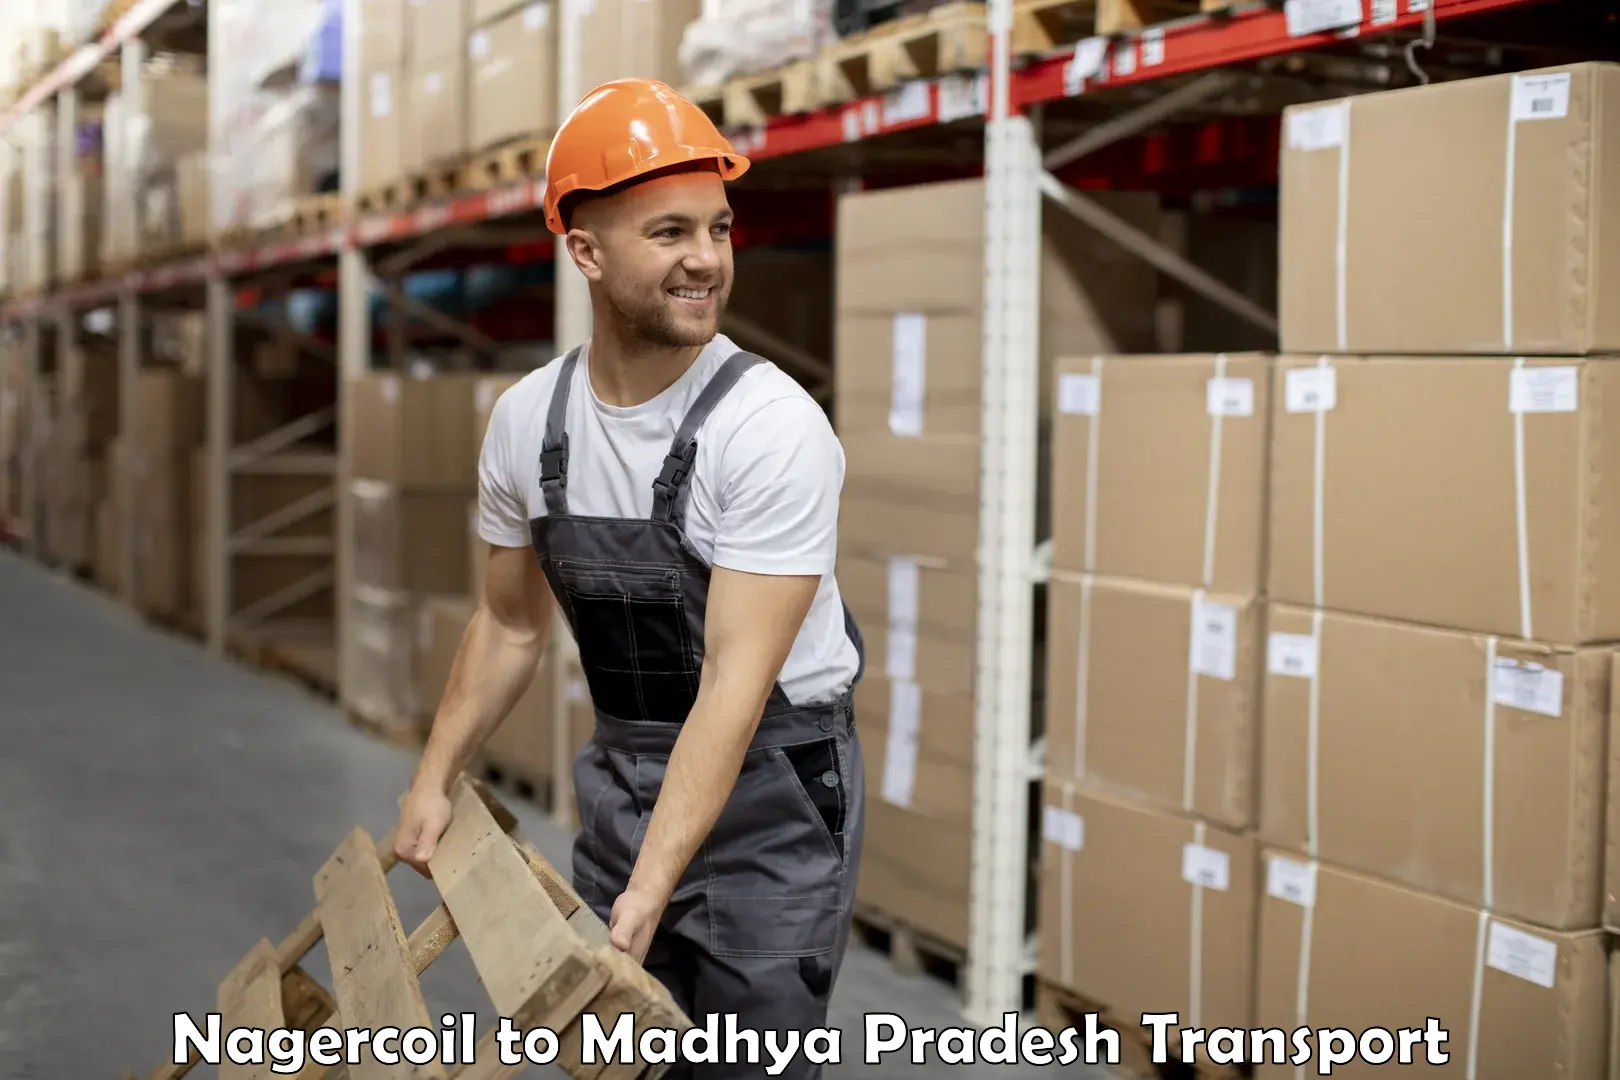 Goods delivery service Nagercoil to Prithvipur